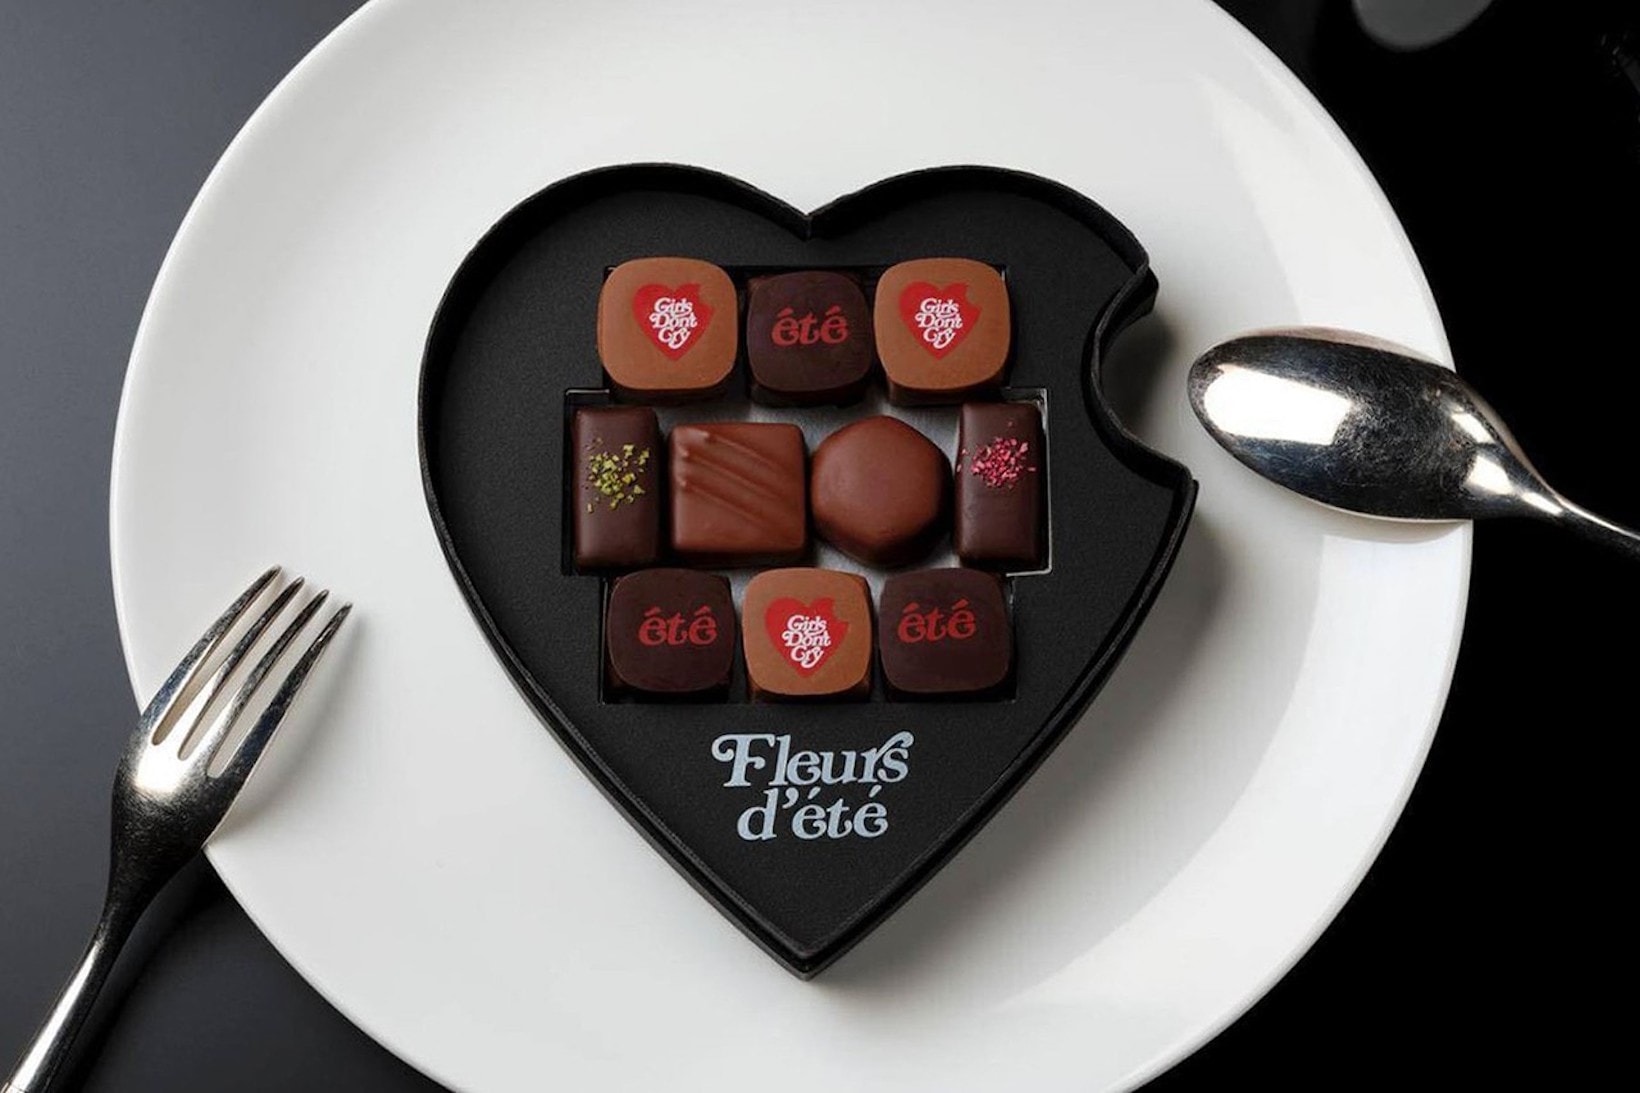 verdy girls dont cry fleur d'ete collaboration black chocolate box spoon fork plate dessert valentines day